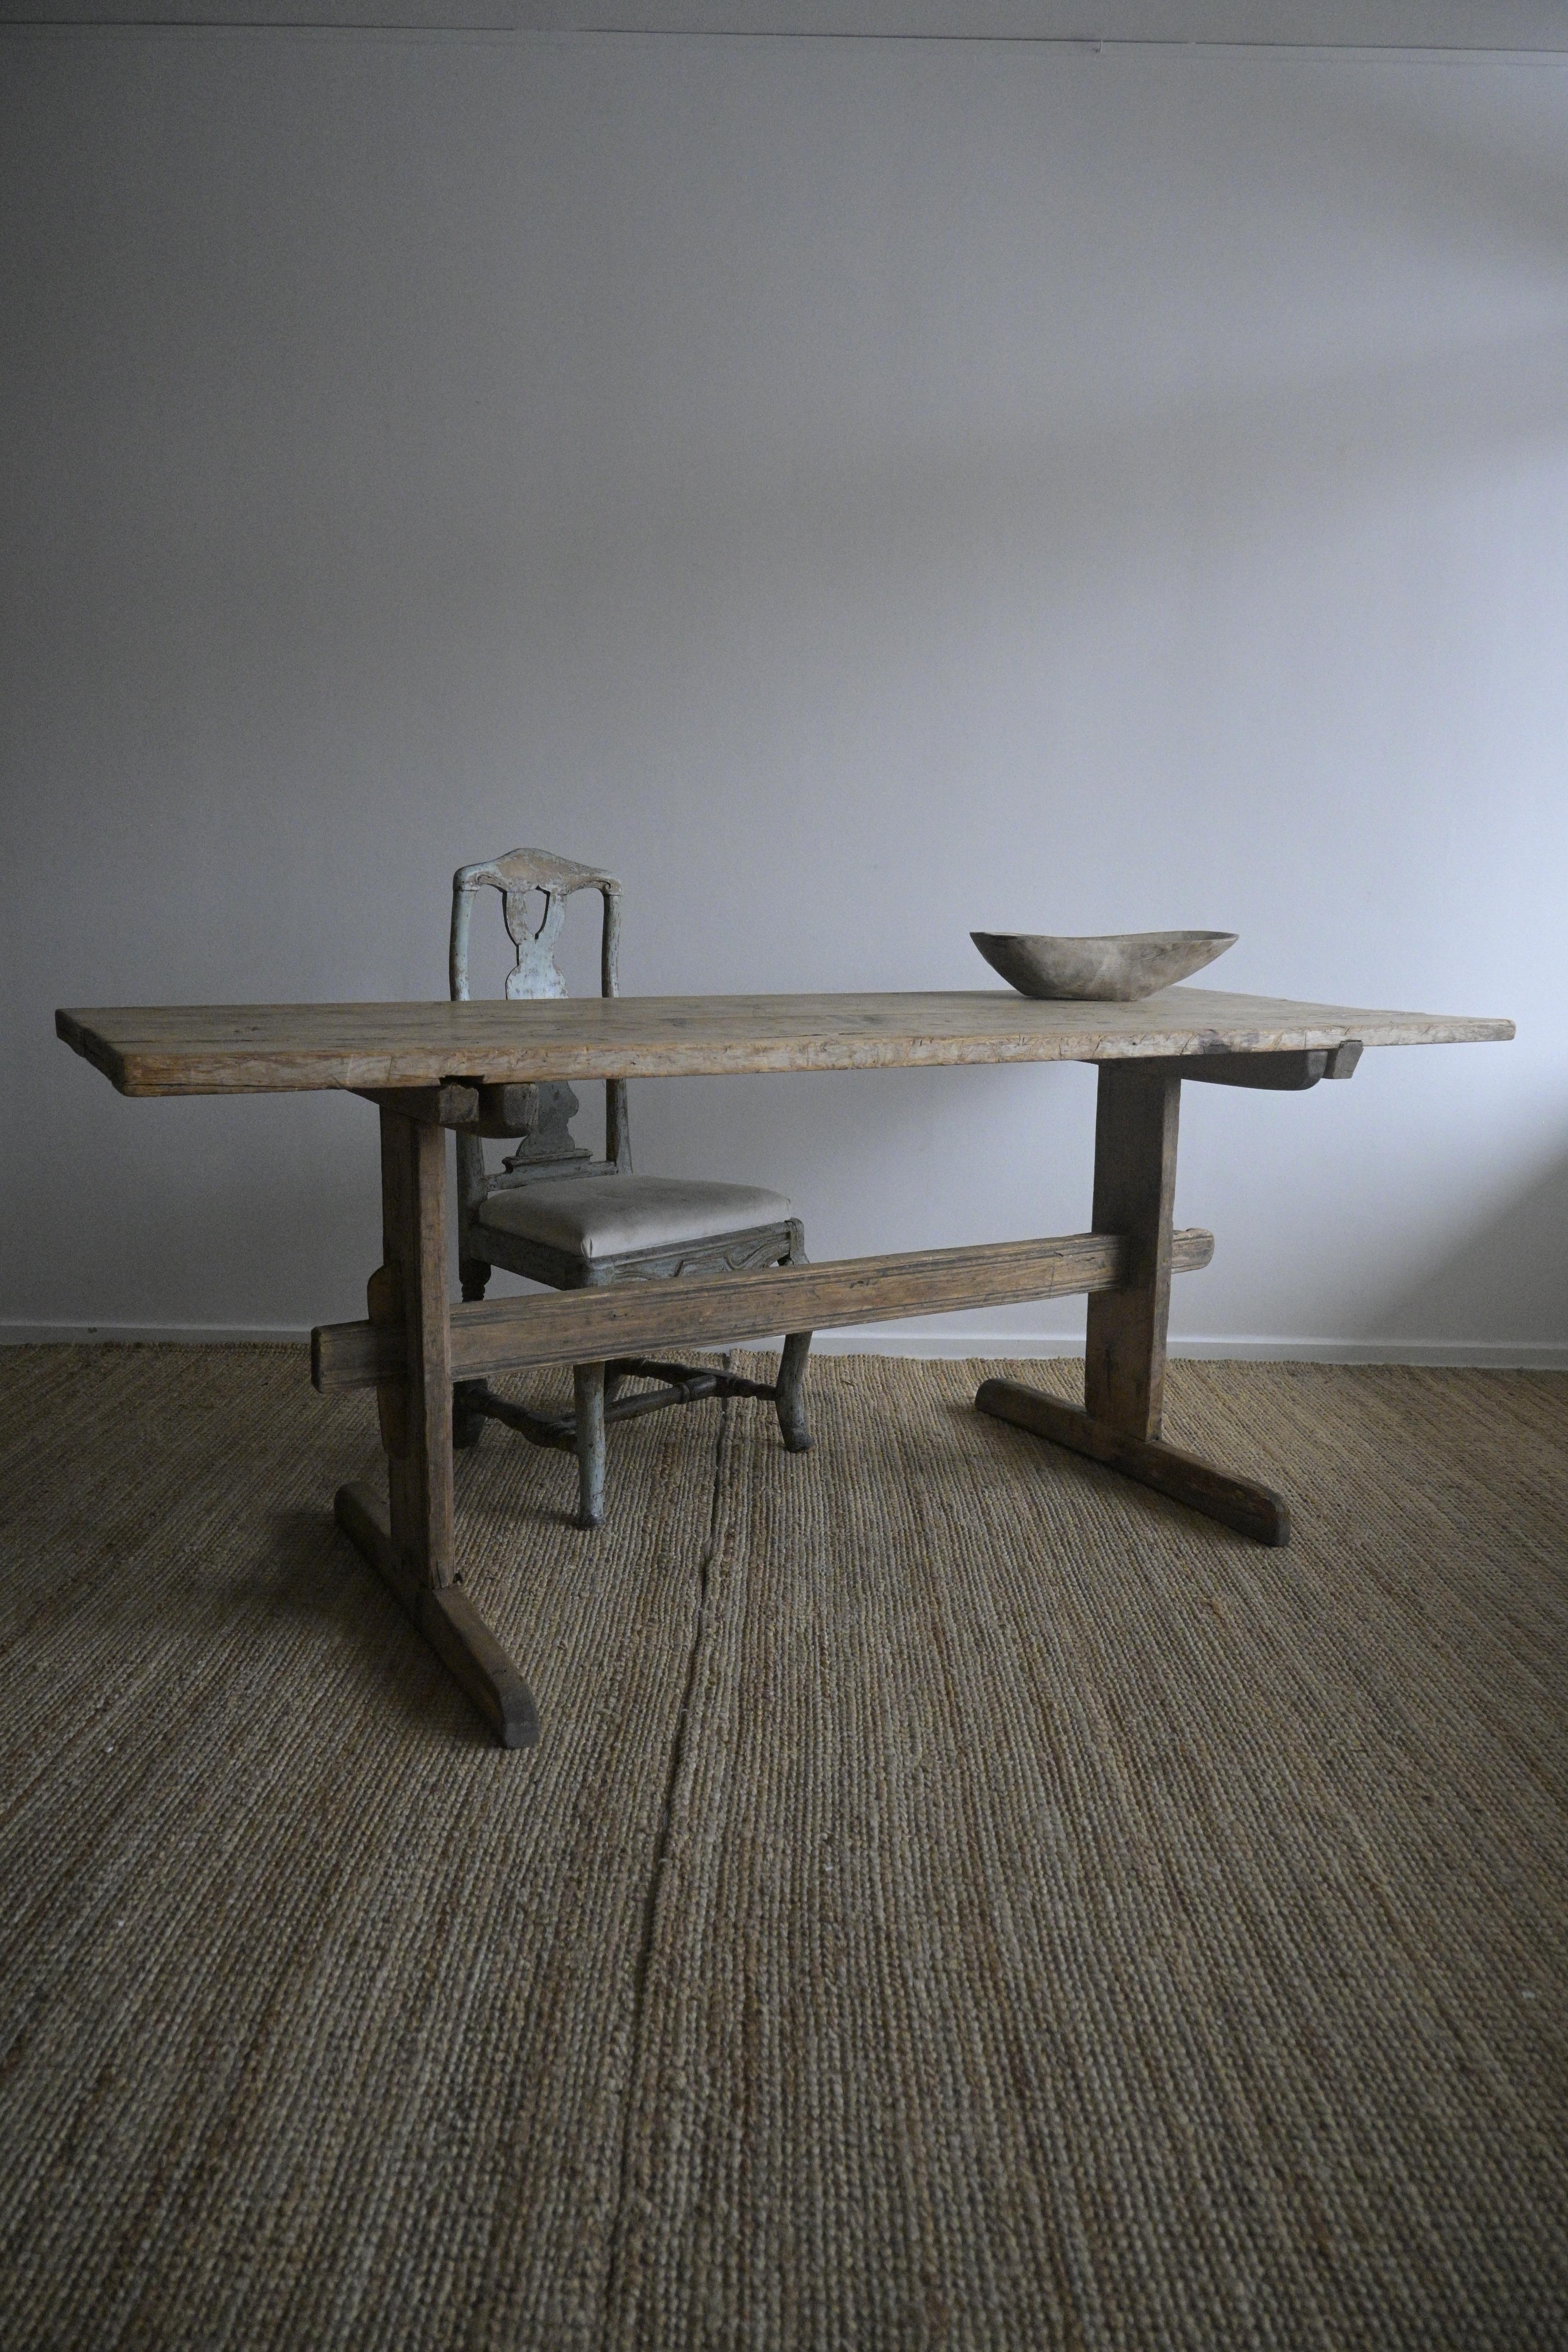 Late 18th-century long Trestle Table from Sweden For Sale 4